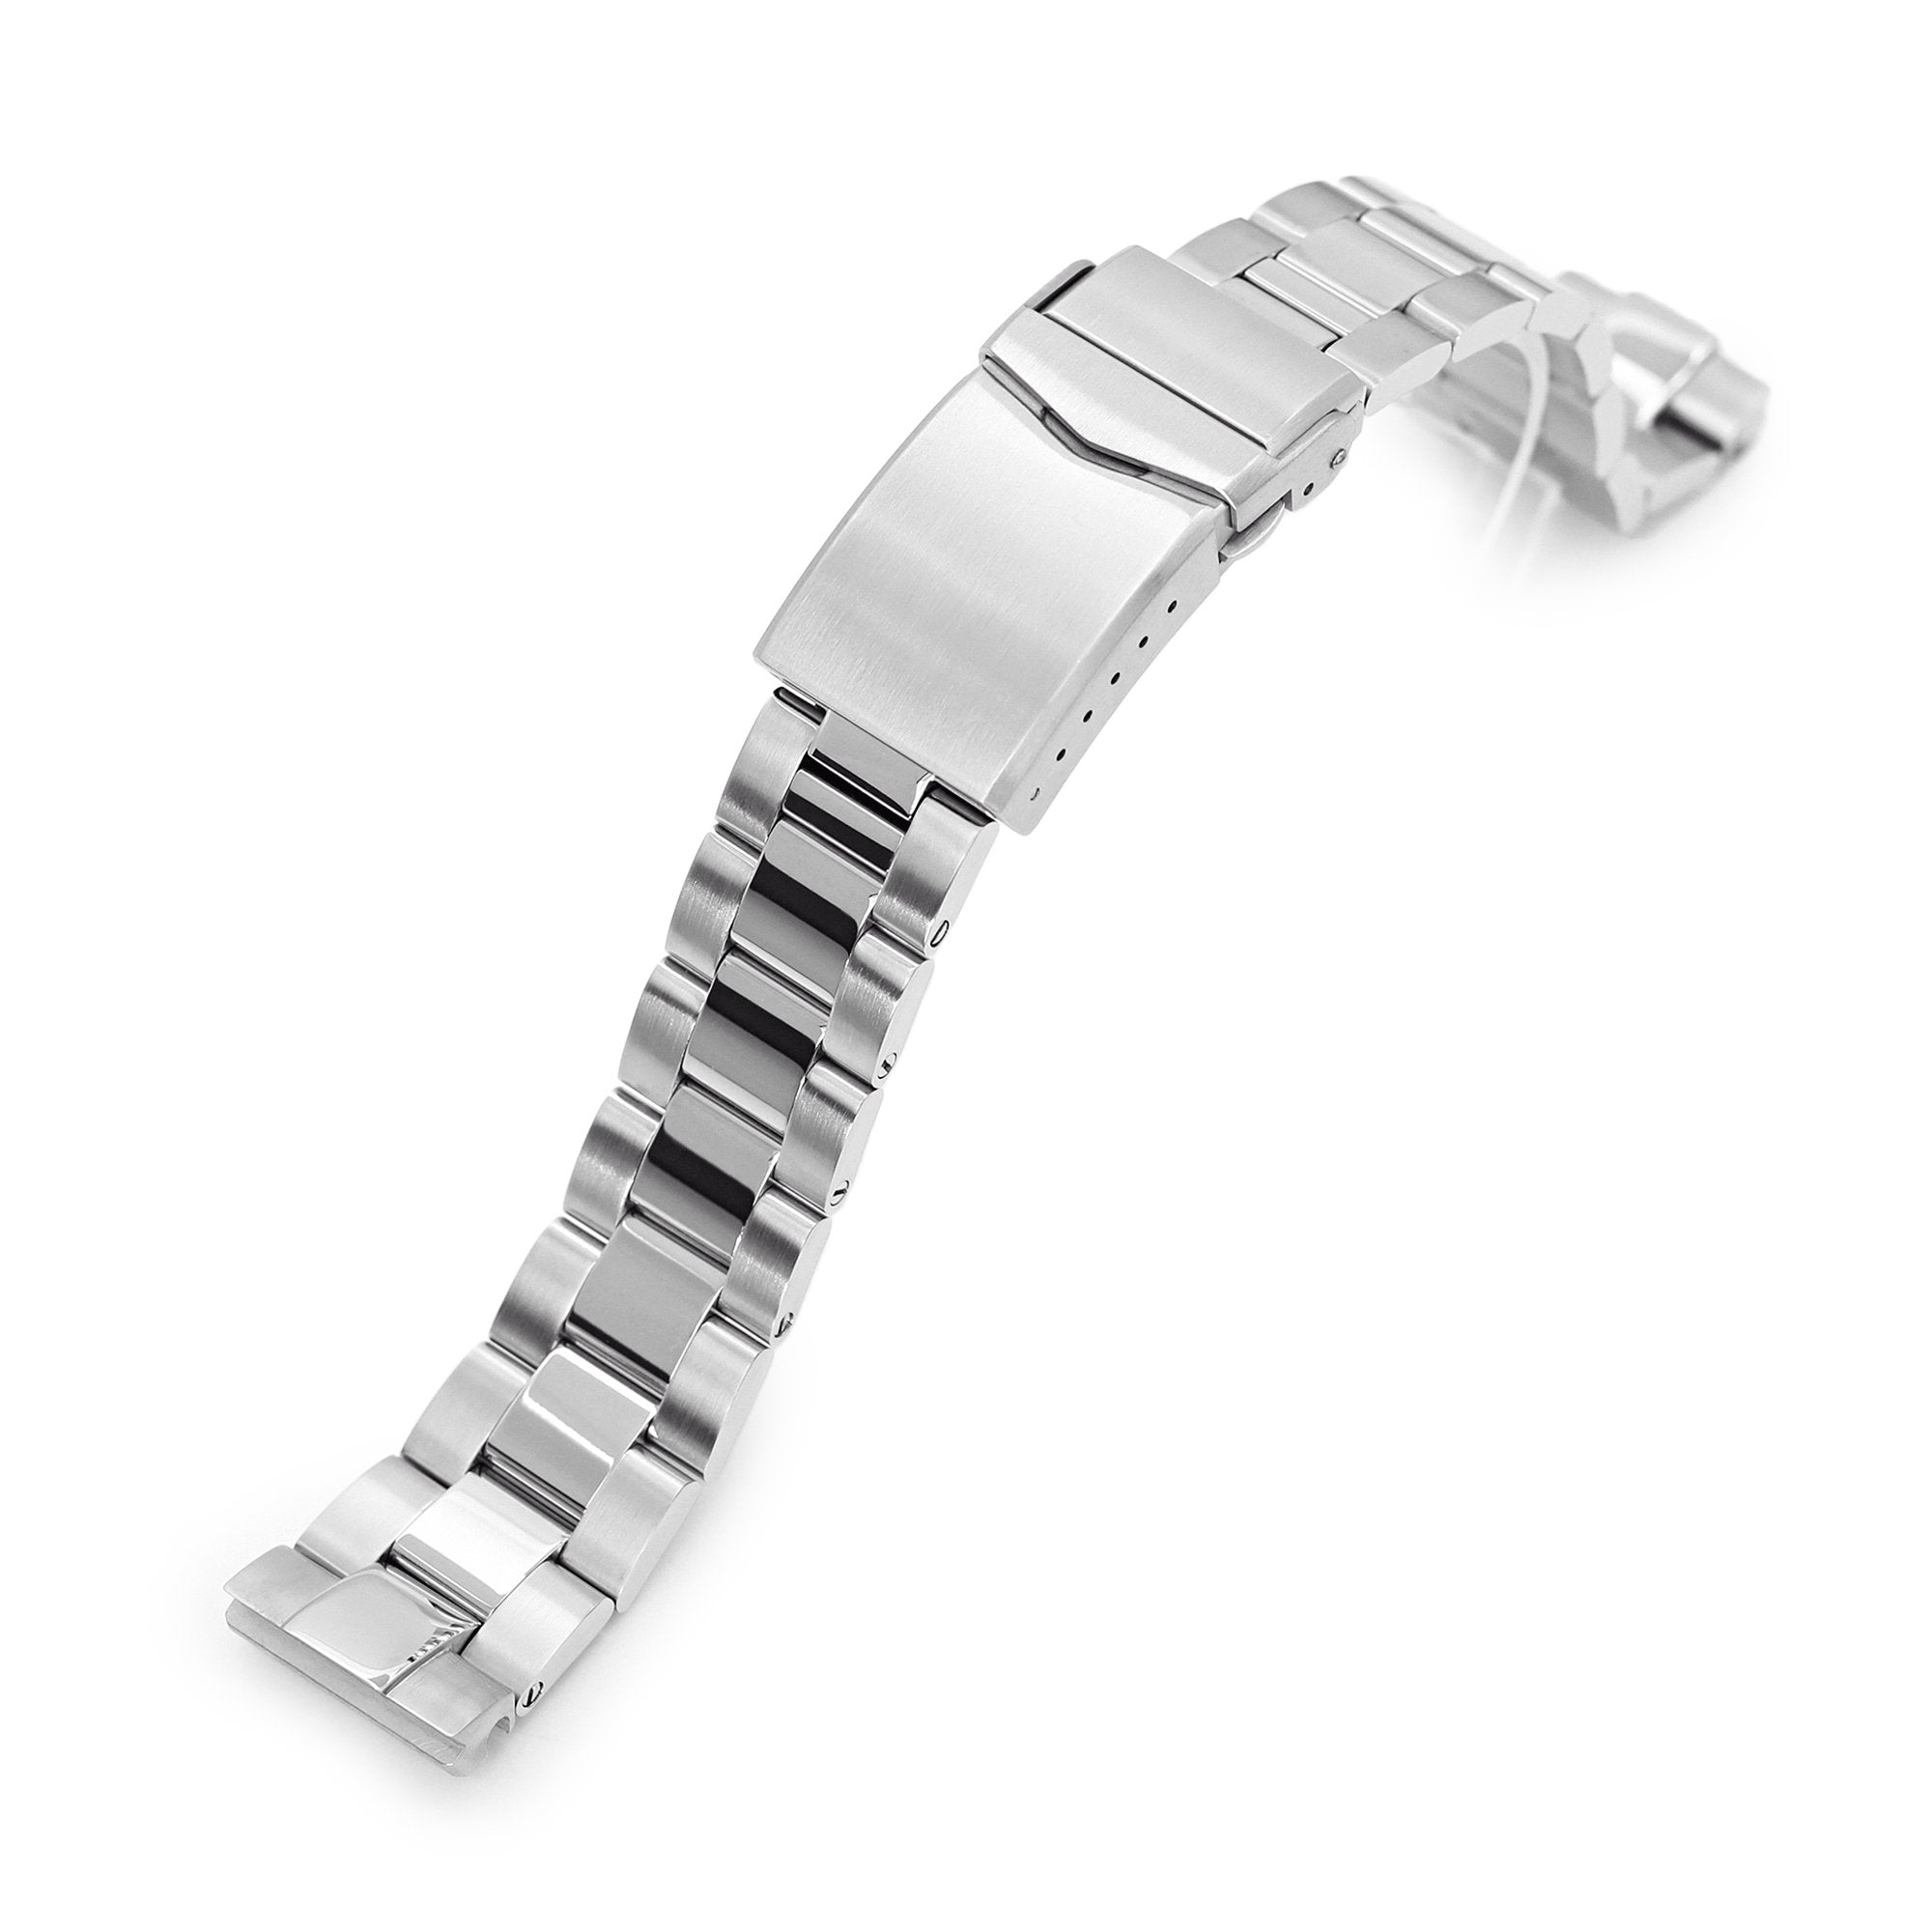 20mm Super-O Boyer 316L Stainless Steel Watch Band for Seiko SBDC053 aka modern 62MAS, Brushed and Polished V-Clasp Strapcode Watch Bands